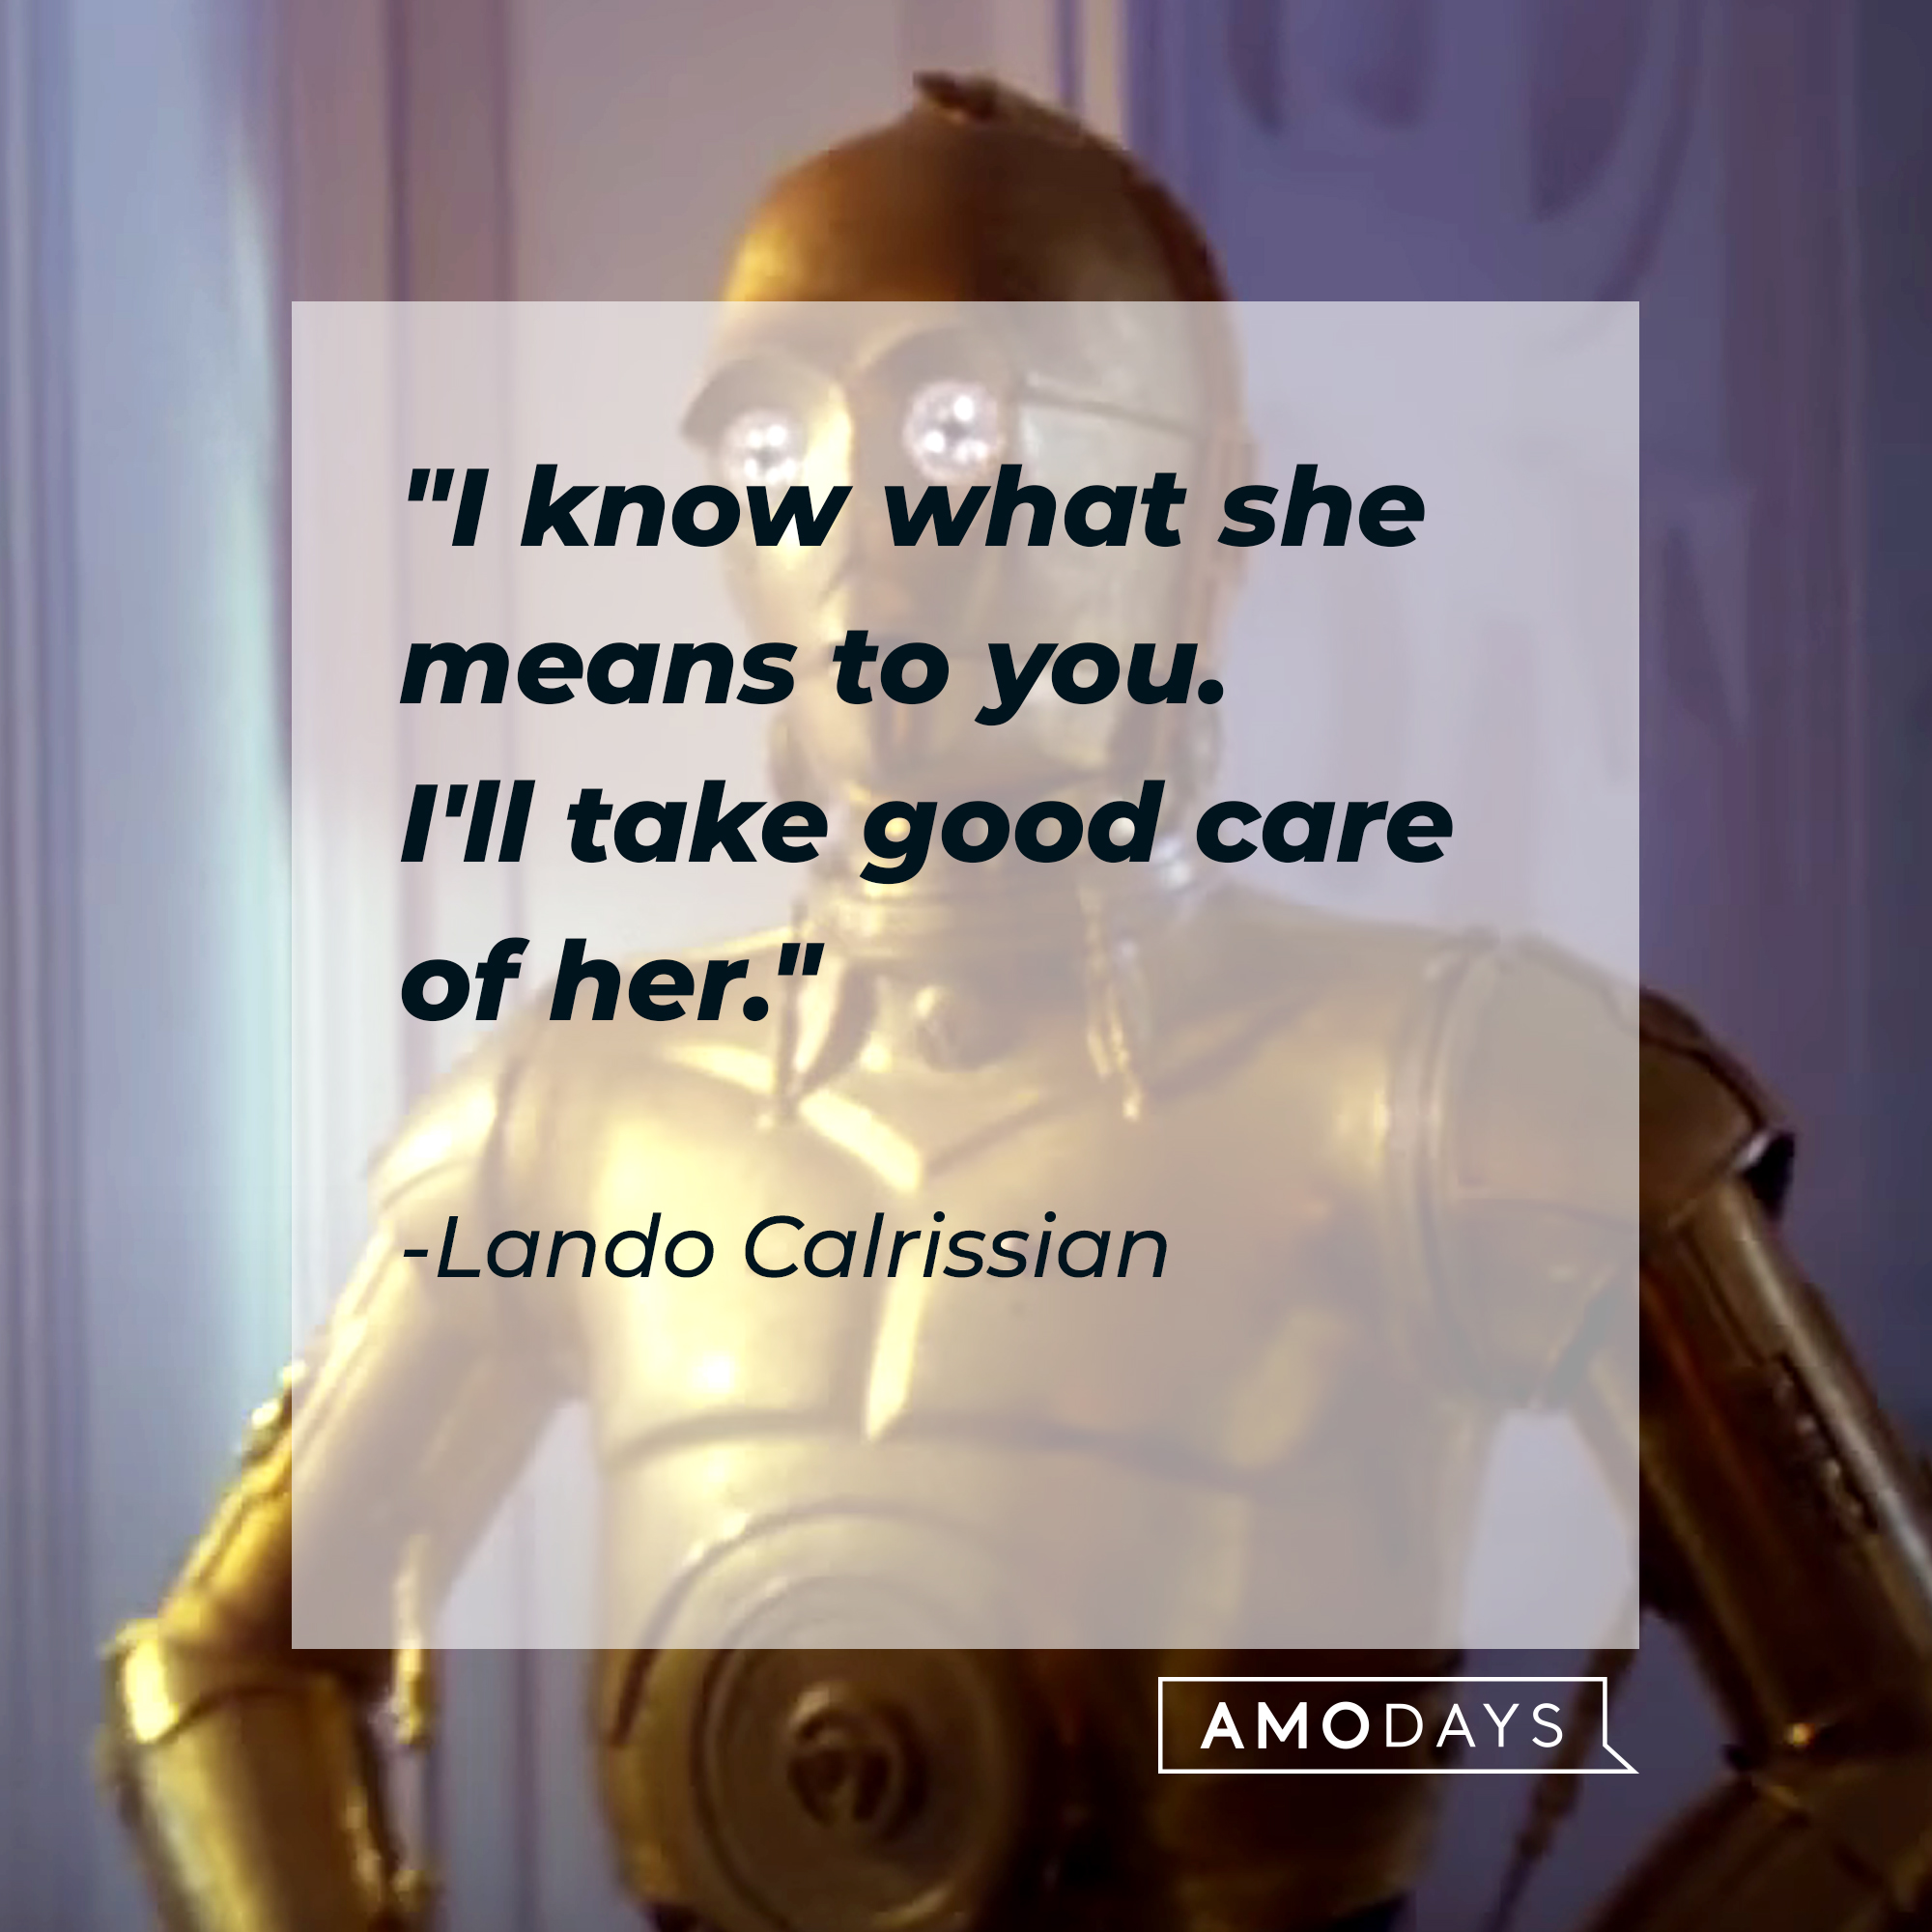 Lando Calrissian's quote, "I know what she means to you. I'll take good care of her." | Source: Facebook/StarWars